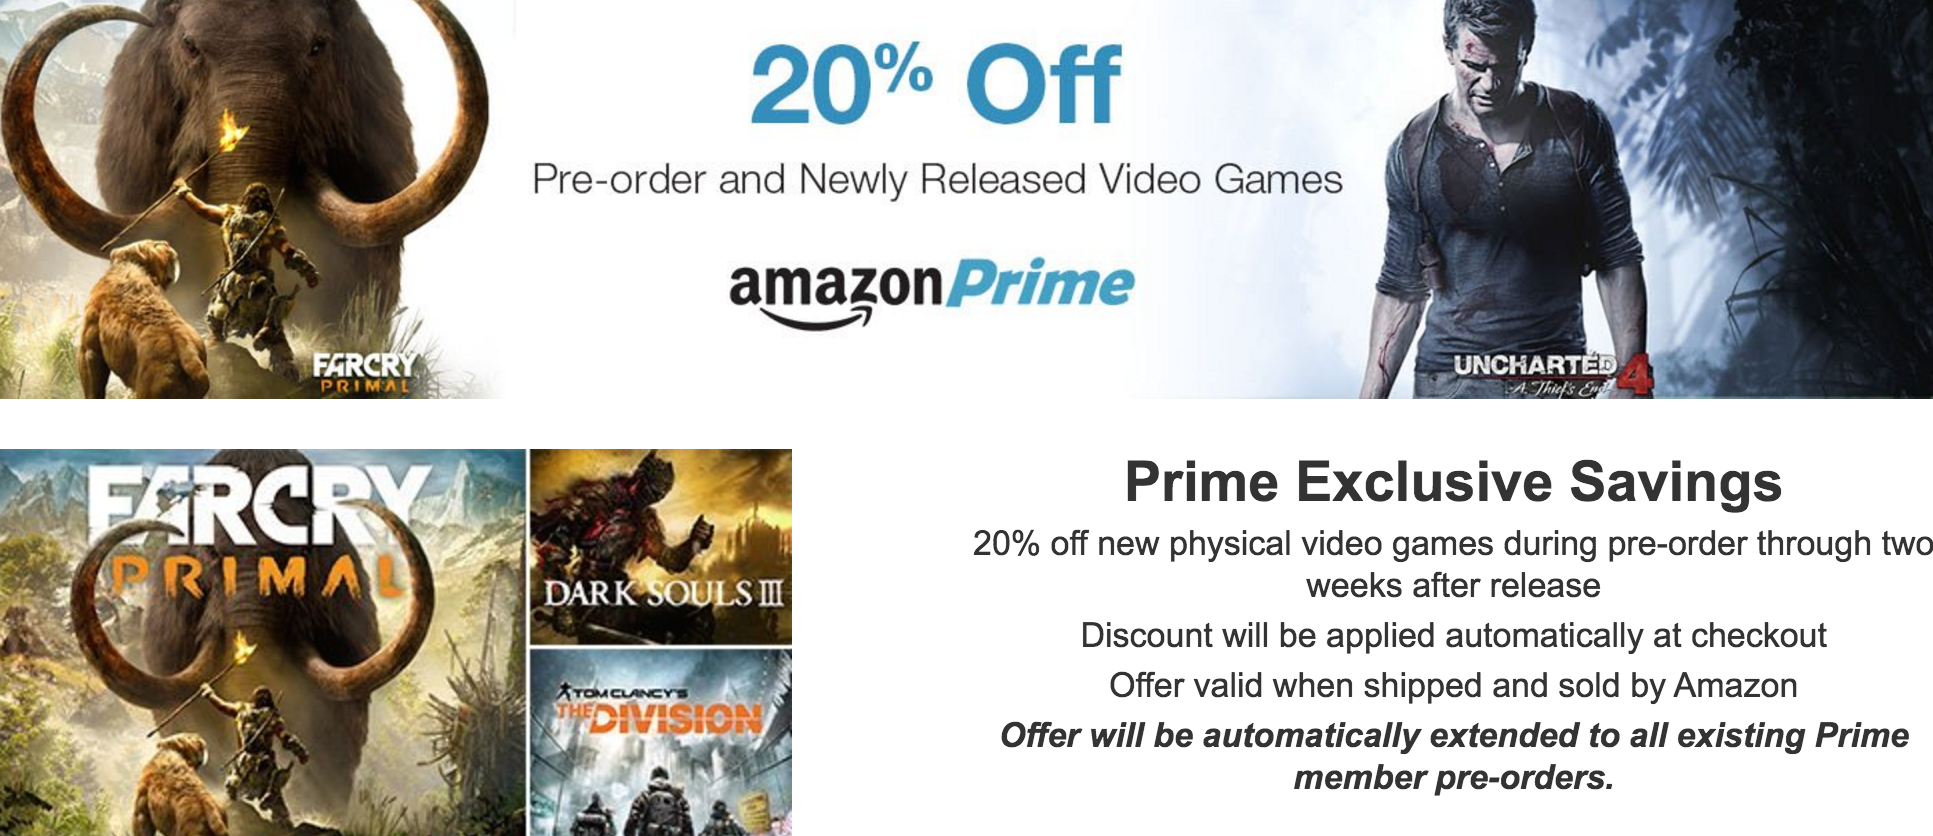 Amazon Prime Adds 20% Discount On Video Game Pre-Orders & New Releases